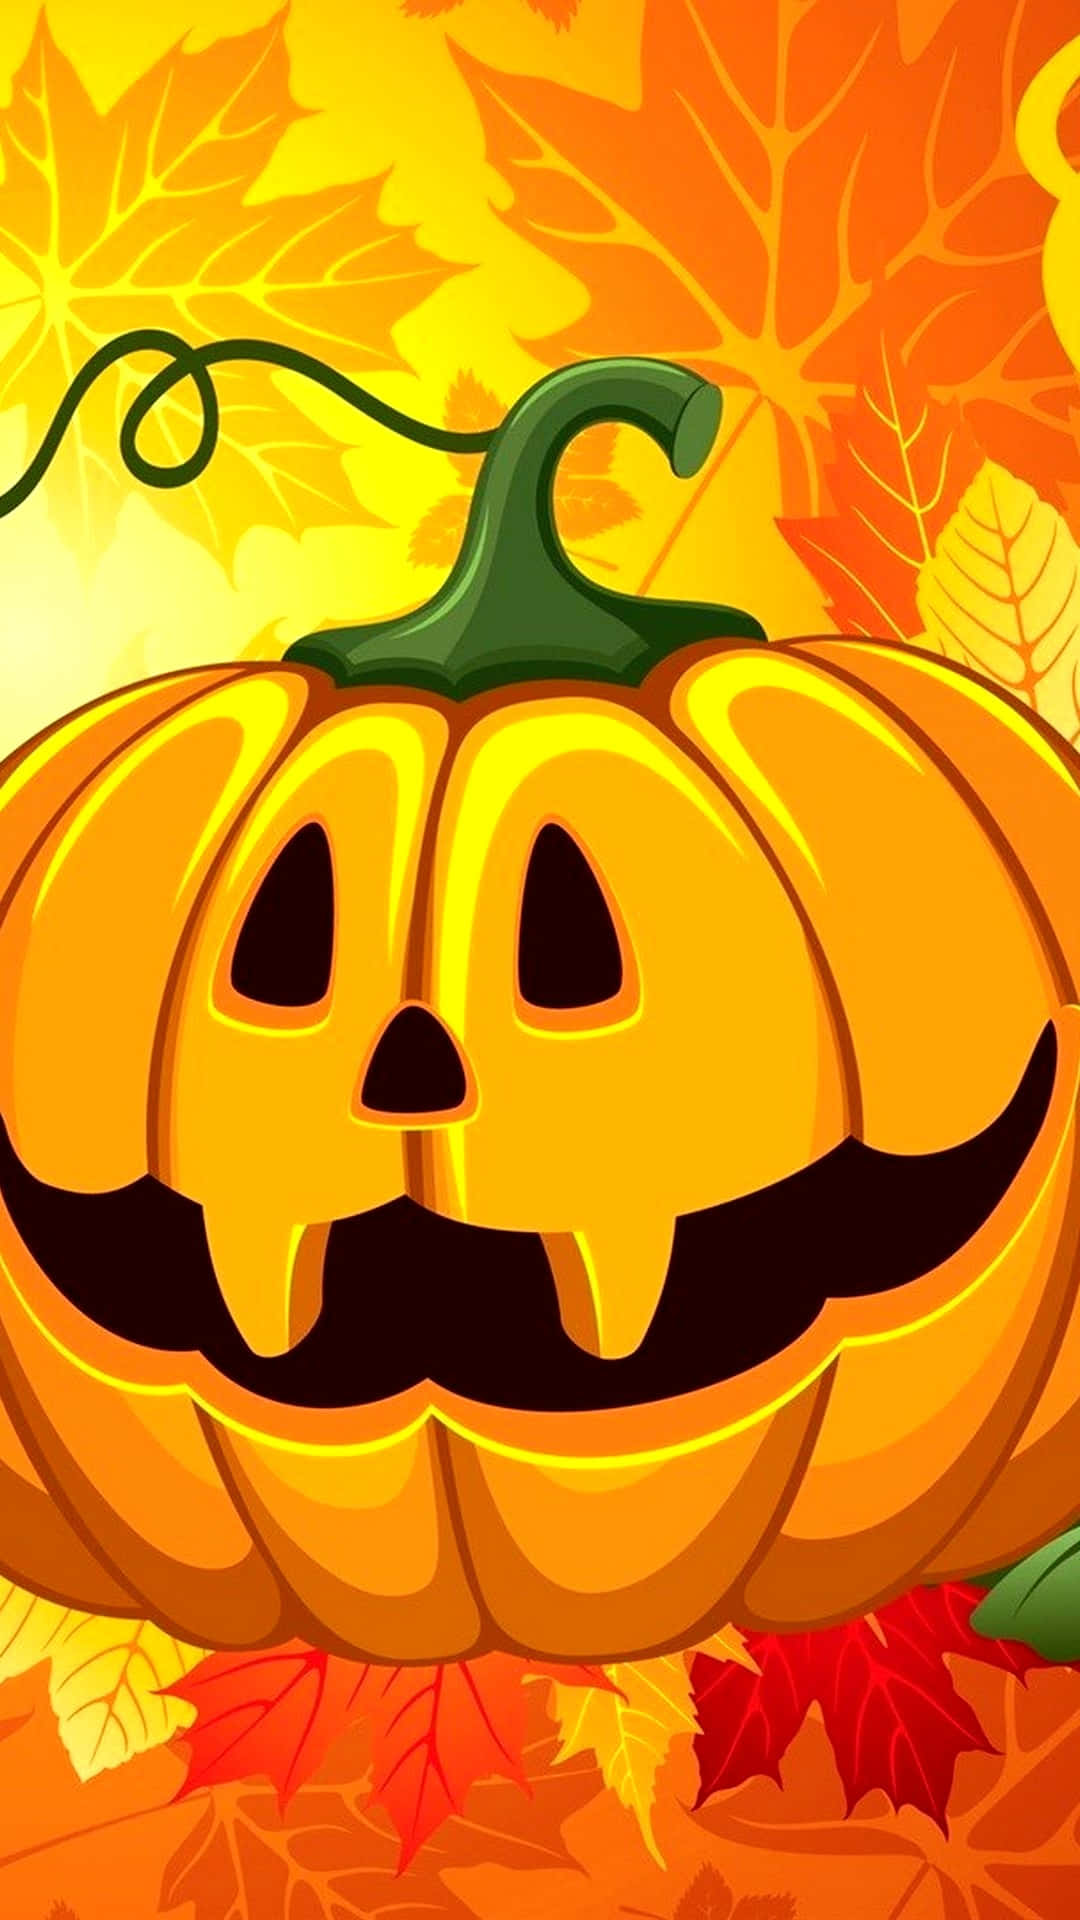 iPhone Halloween Background Jack O'Lantern And Maple Leaves Graphic